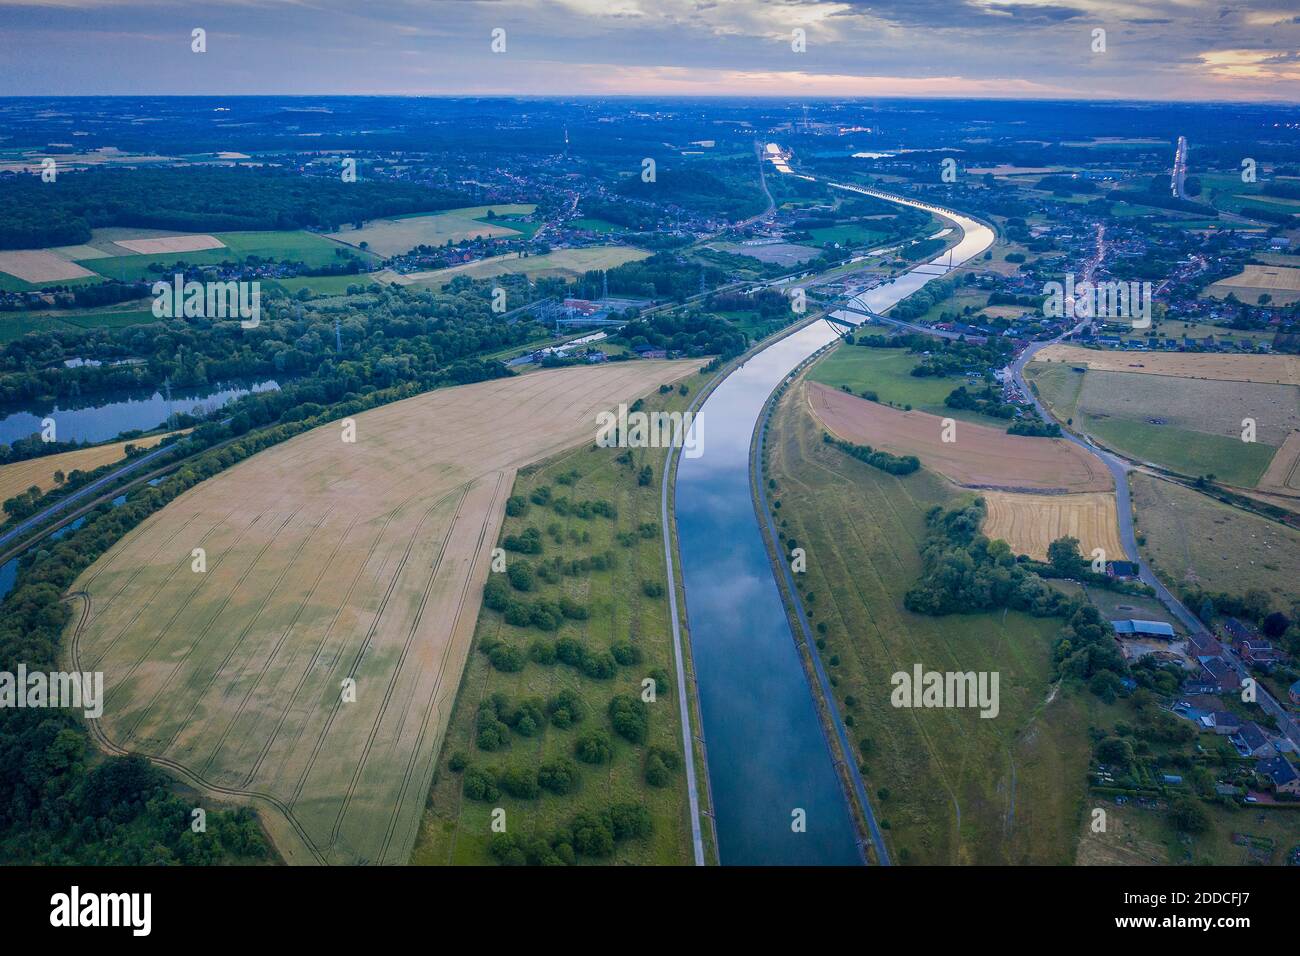 Belgium, Hainaut Province, Aerial view of Canal du Centre at dusk Stock Photo